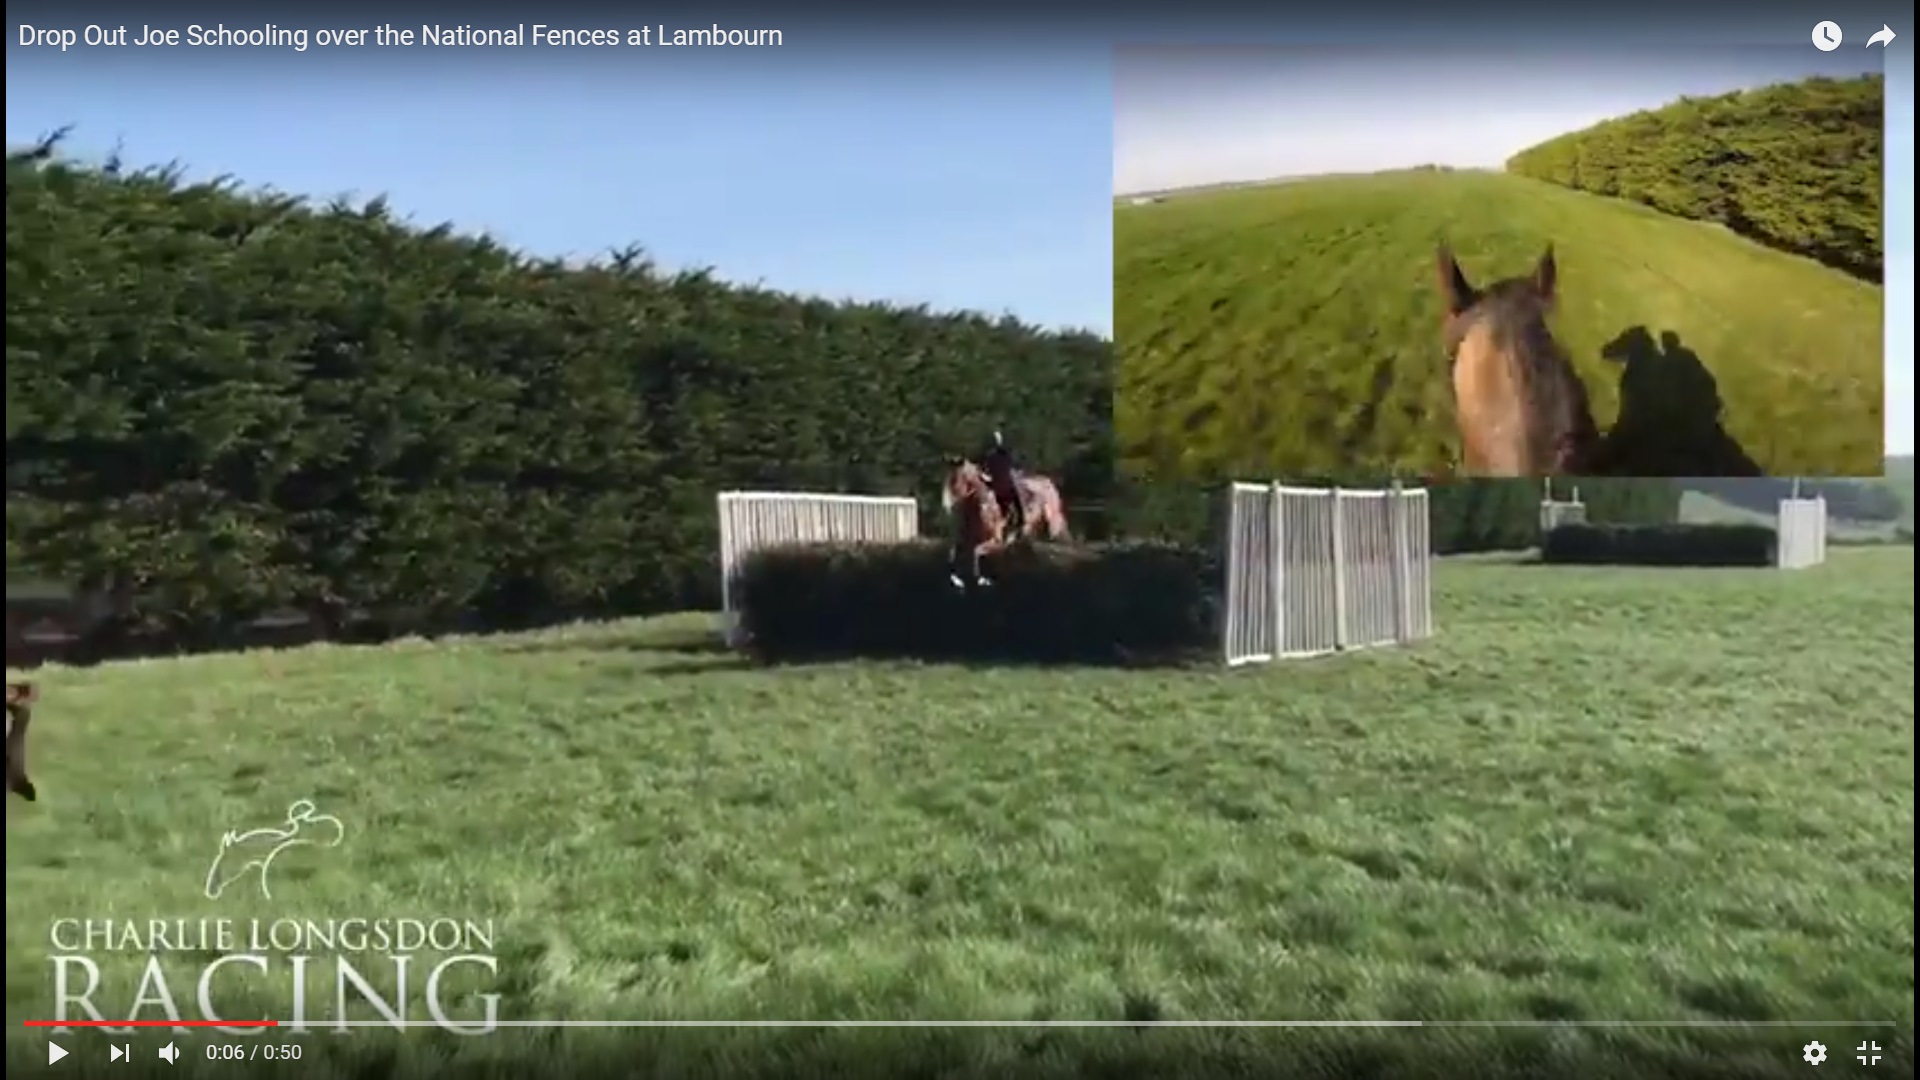 Drop Out Joe Schooling over National Fences in Lambourn